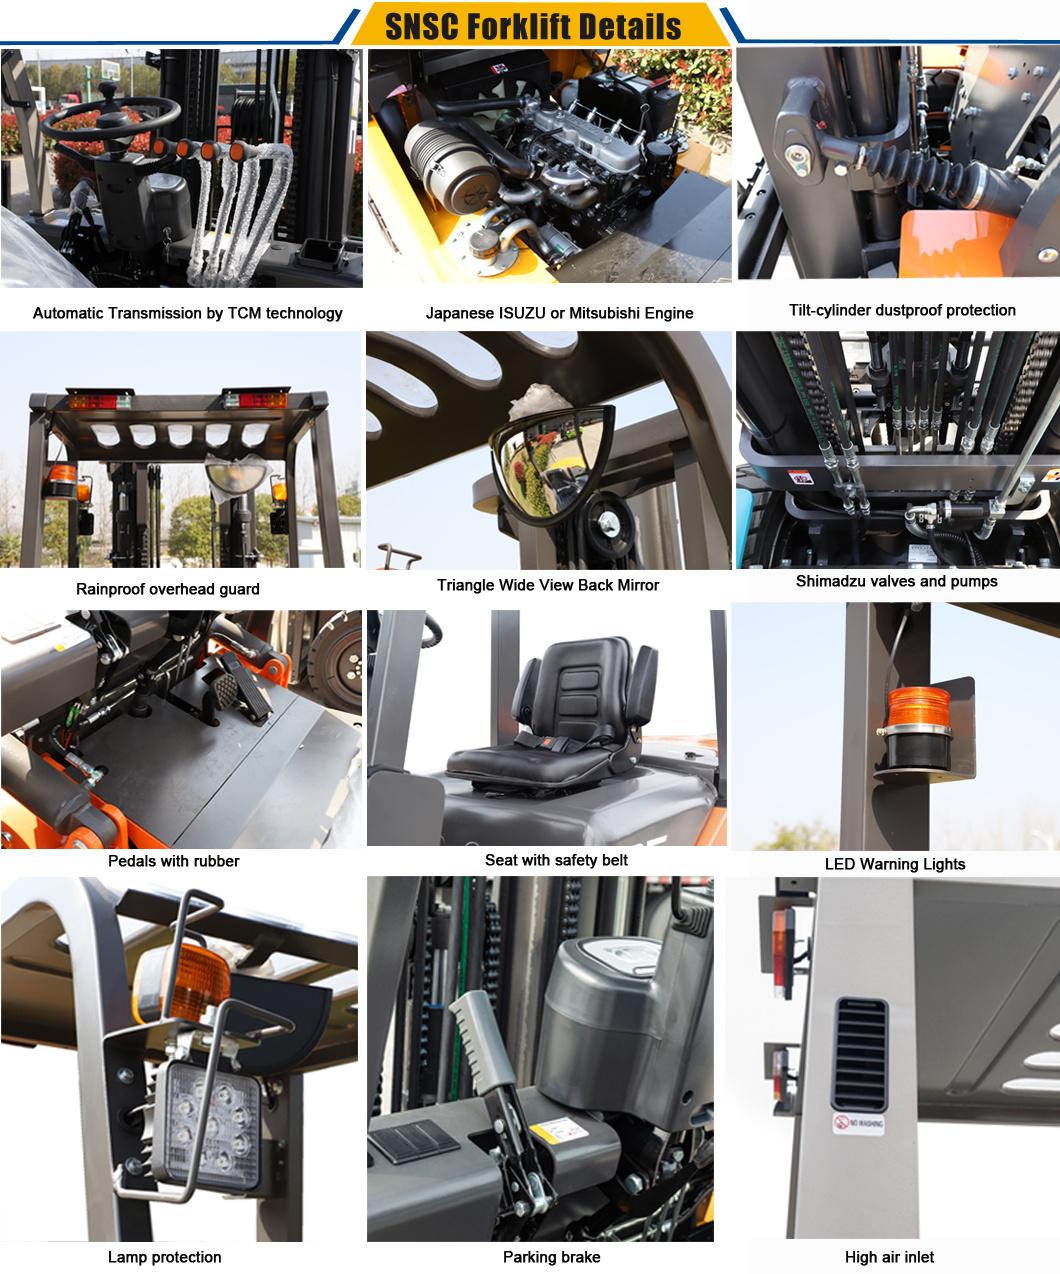 China 3ton Diesel Forklift Truck with Japan Engine C240